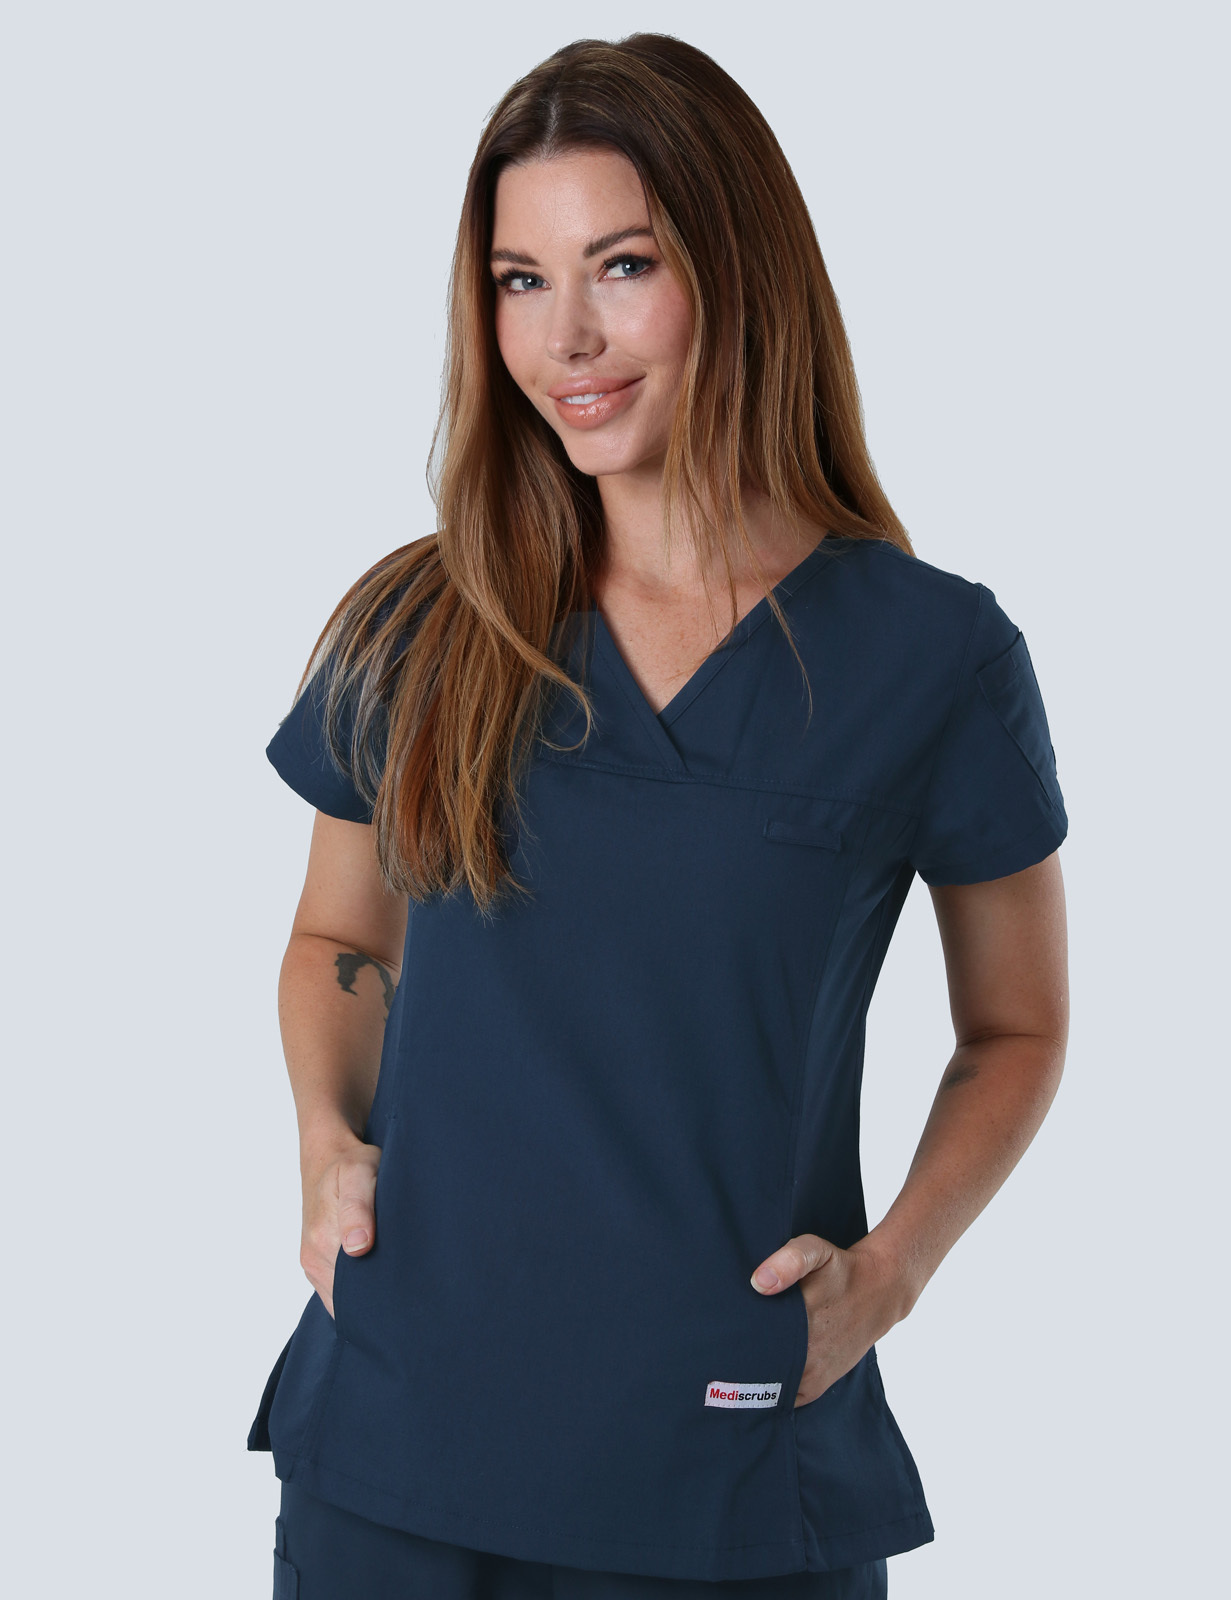 Inglewood MPHS - EN (Women's Fit Solid Scrub Top and Cargo Pants in Navy incl Logos)